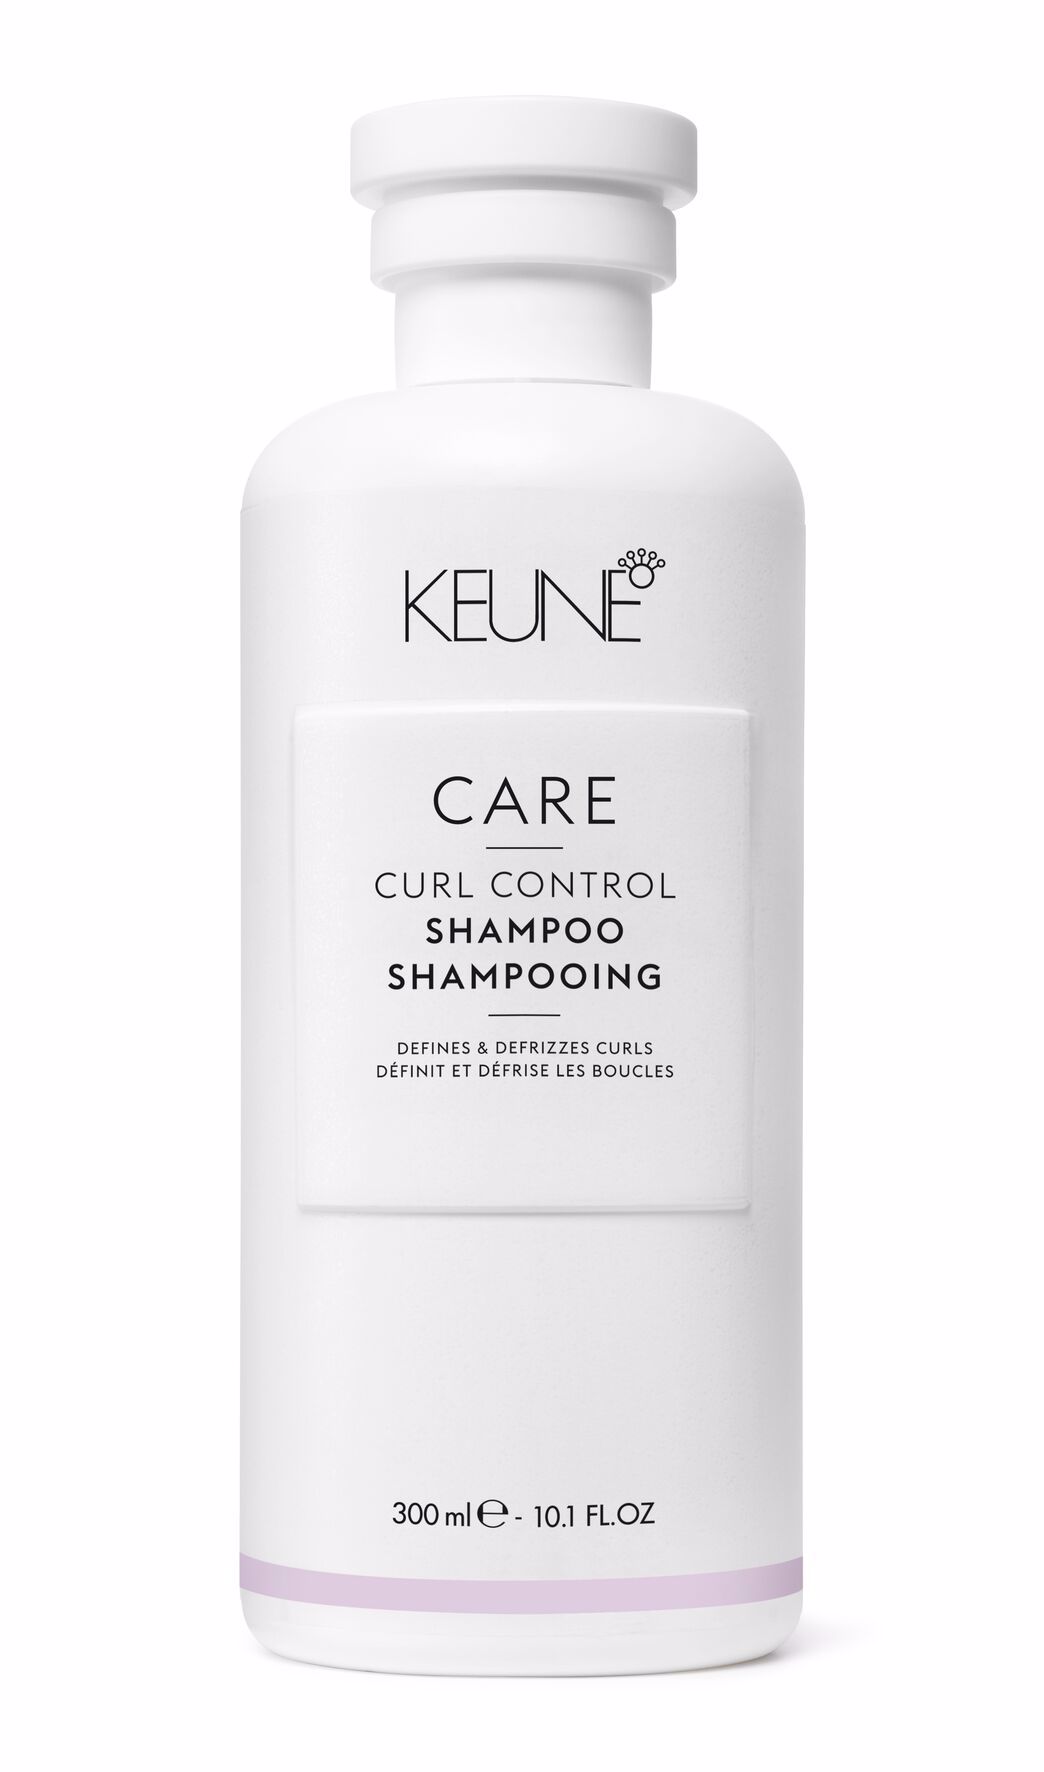 Discover the best curly hair products. Our Care Curl Control Shampoo is specially designed for curly hair. Secure your curly hair shampoo now on keune.ch!